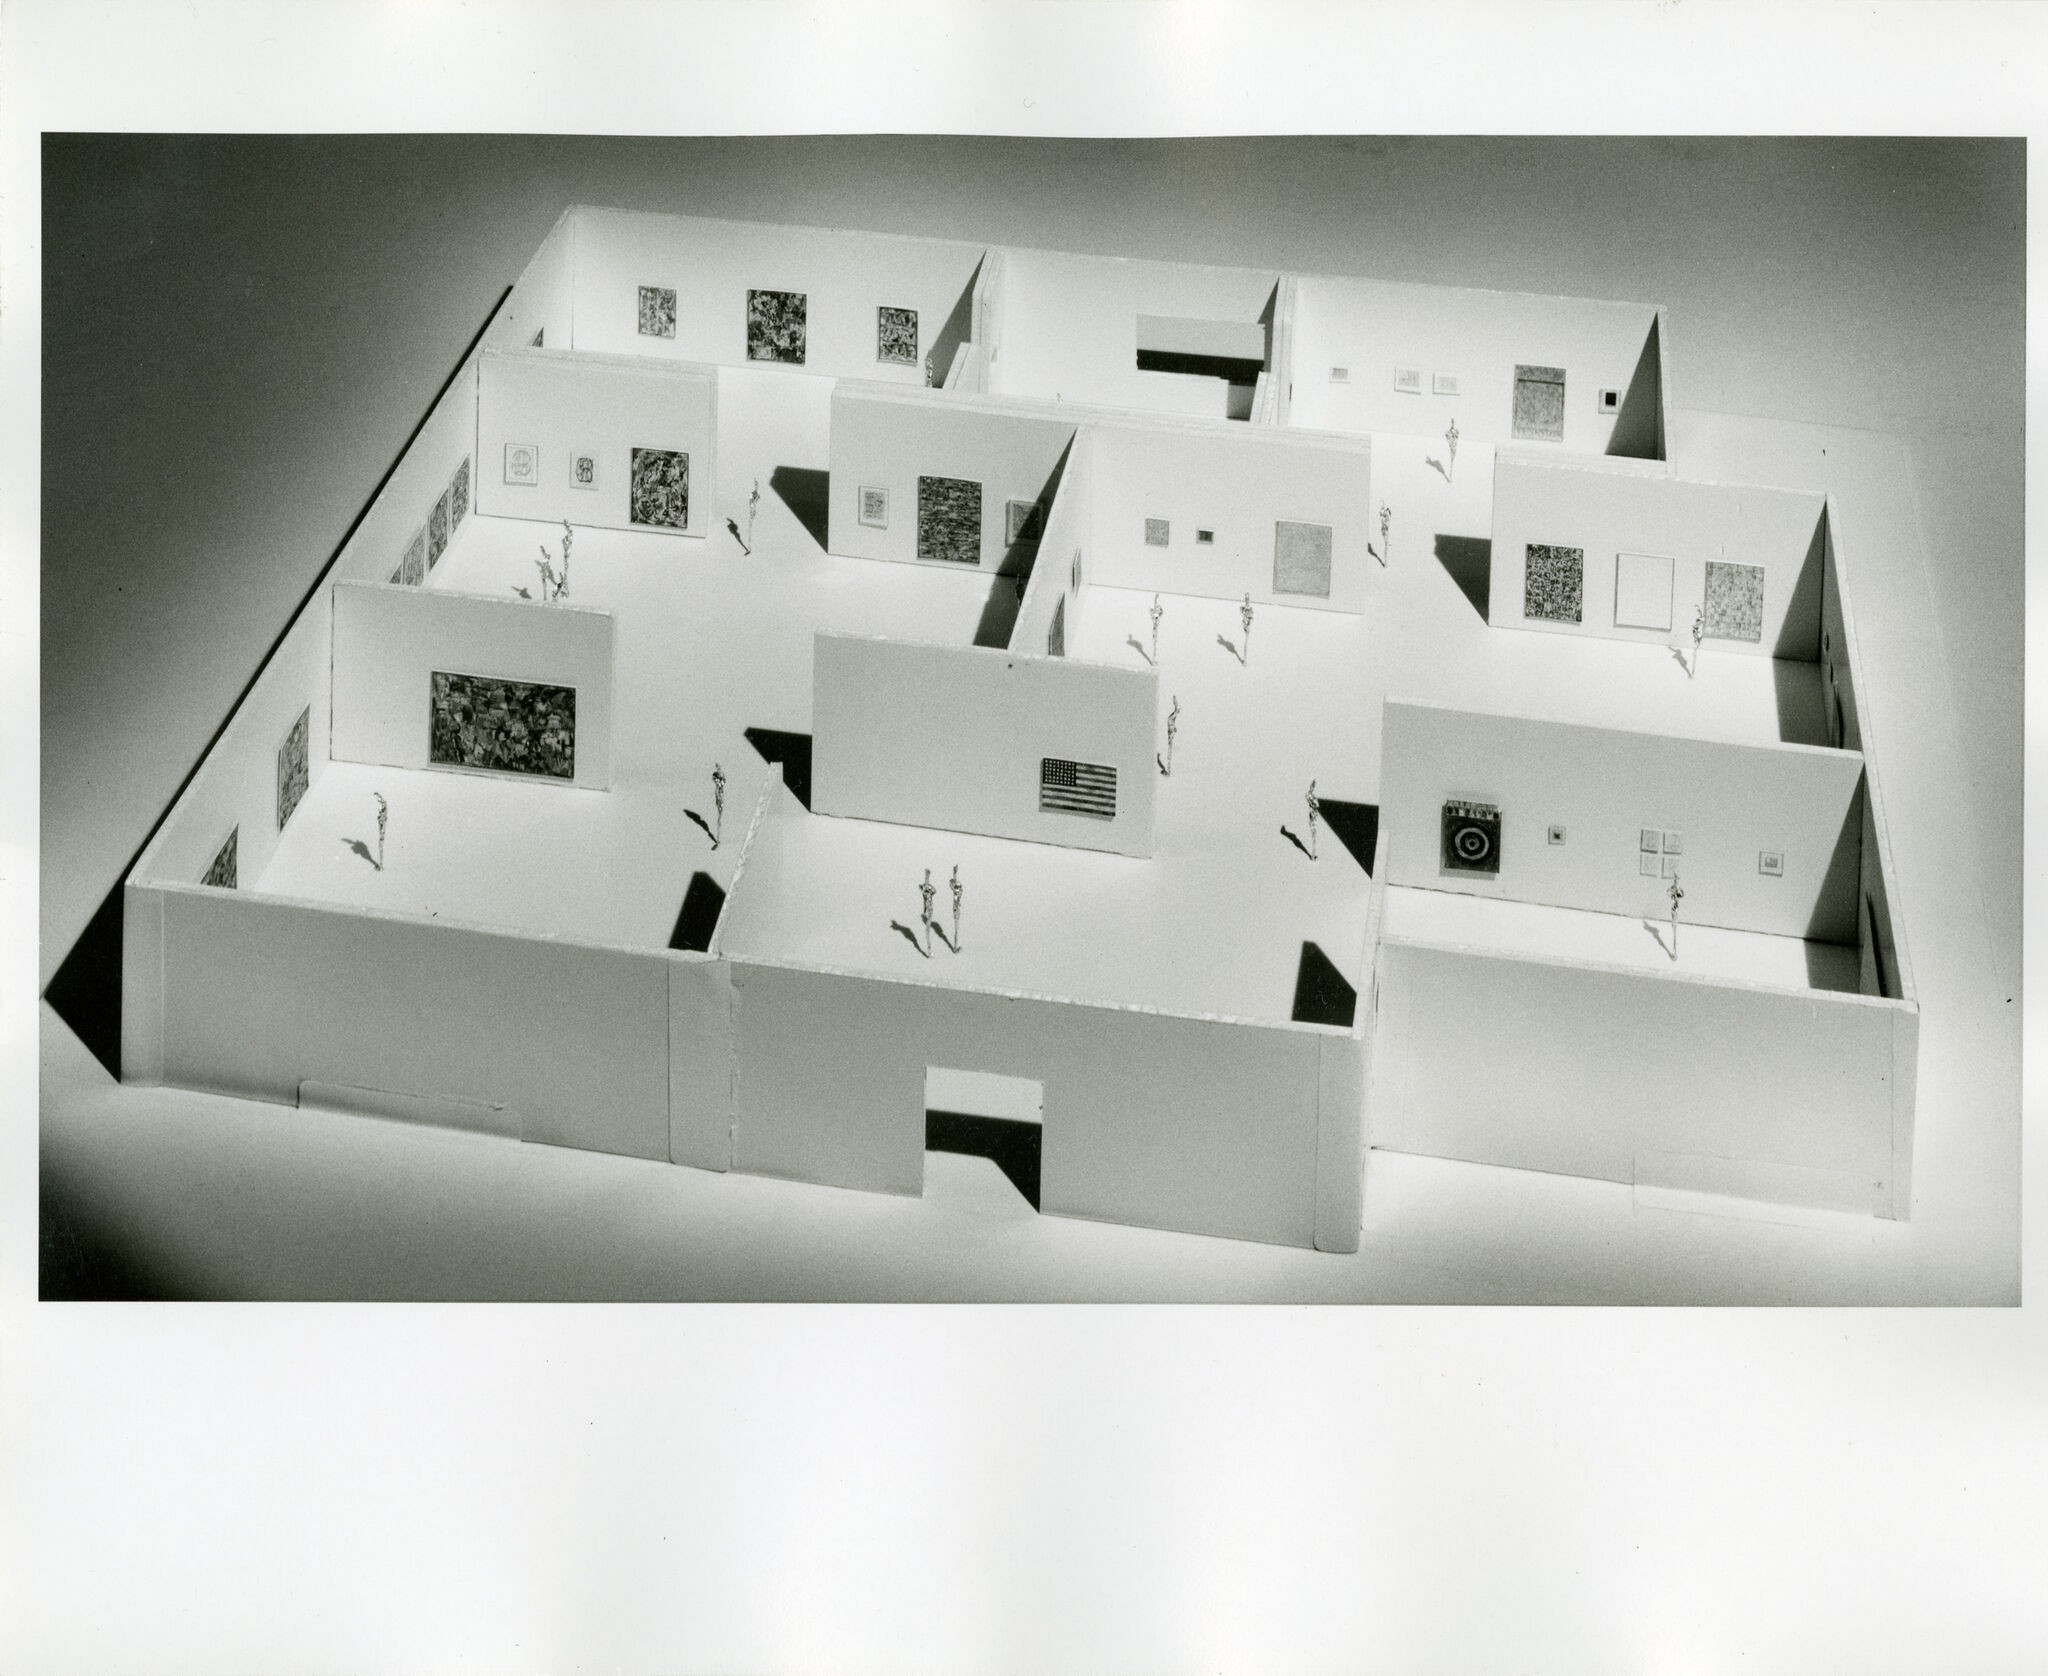 Black-and-white photograph of a three-dimensional model of a floor plan.